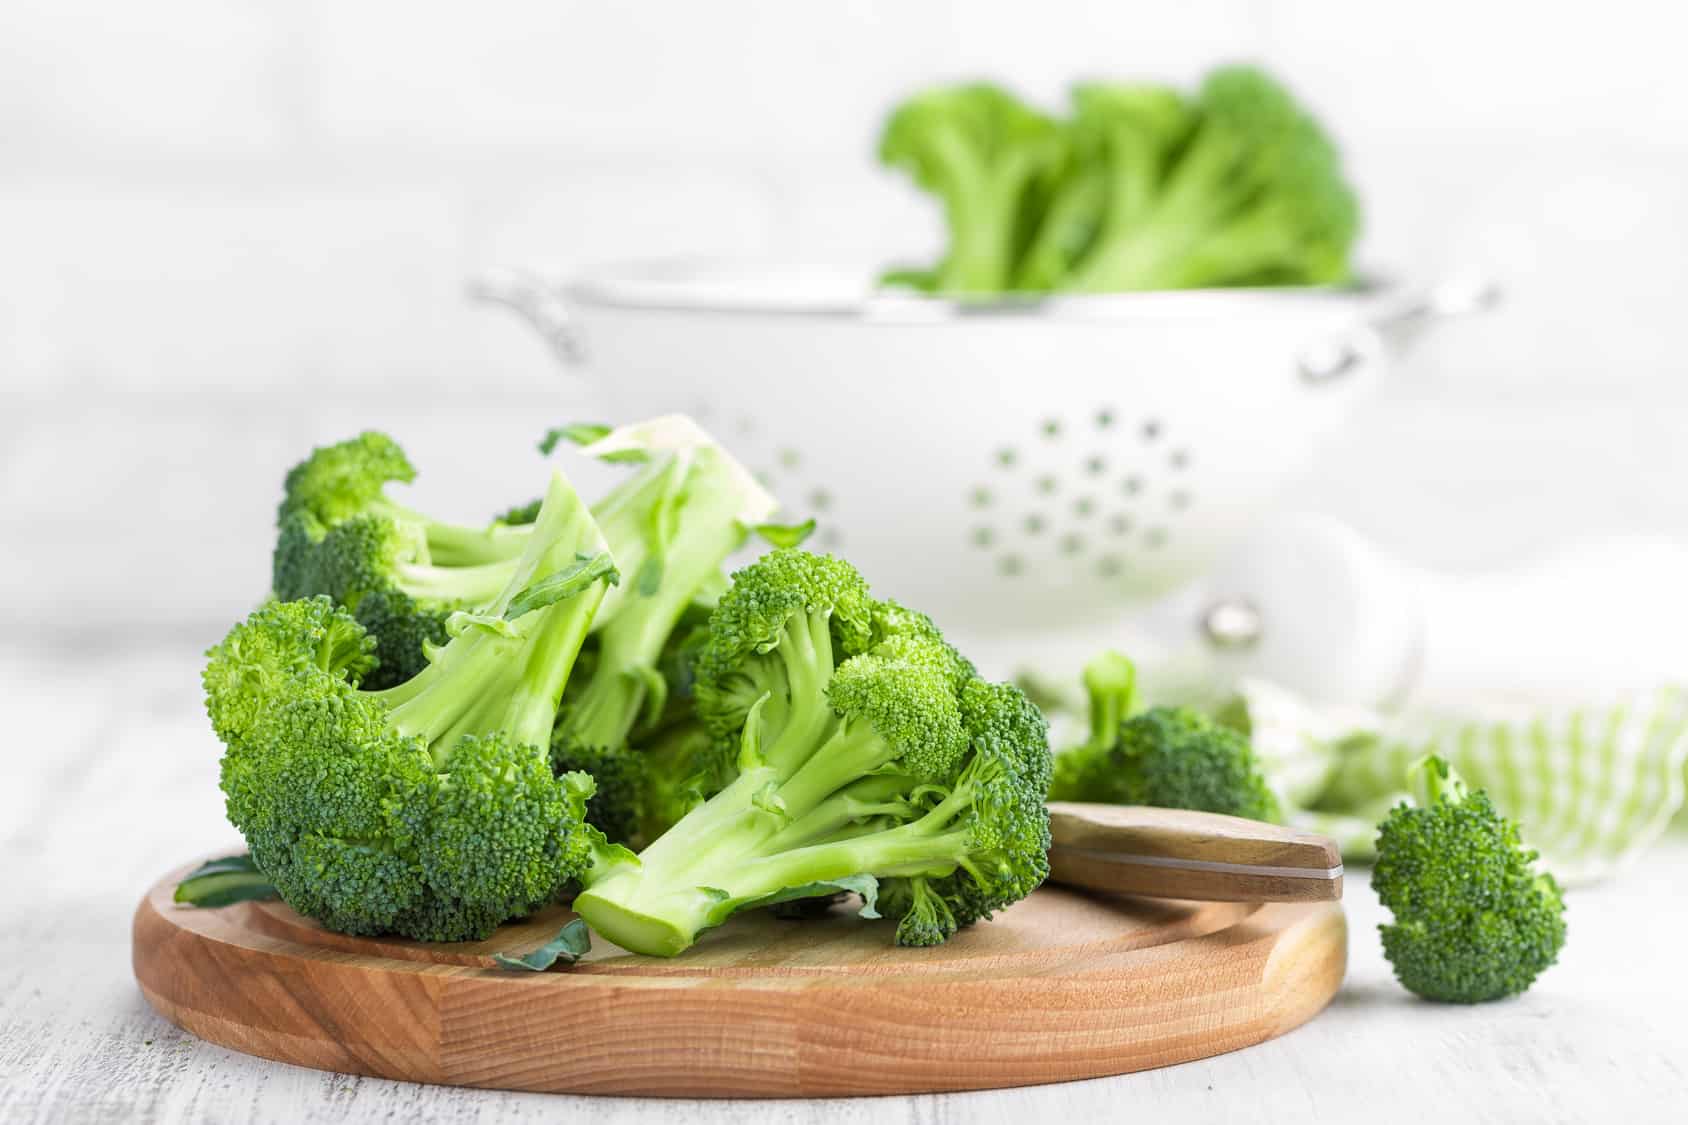 cancer prevention benefits of broccoli